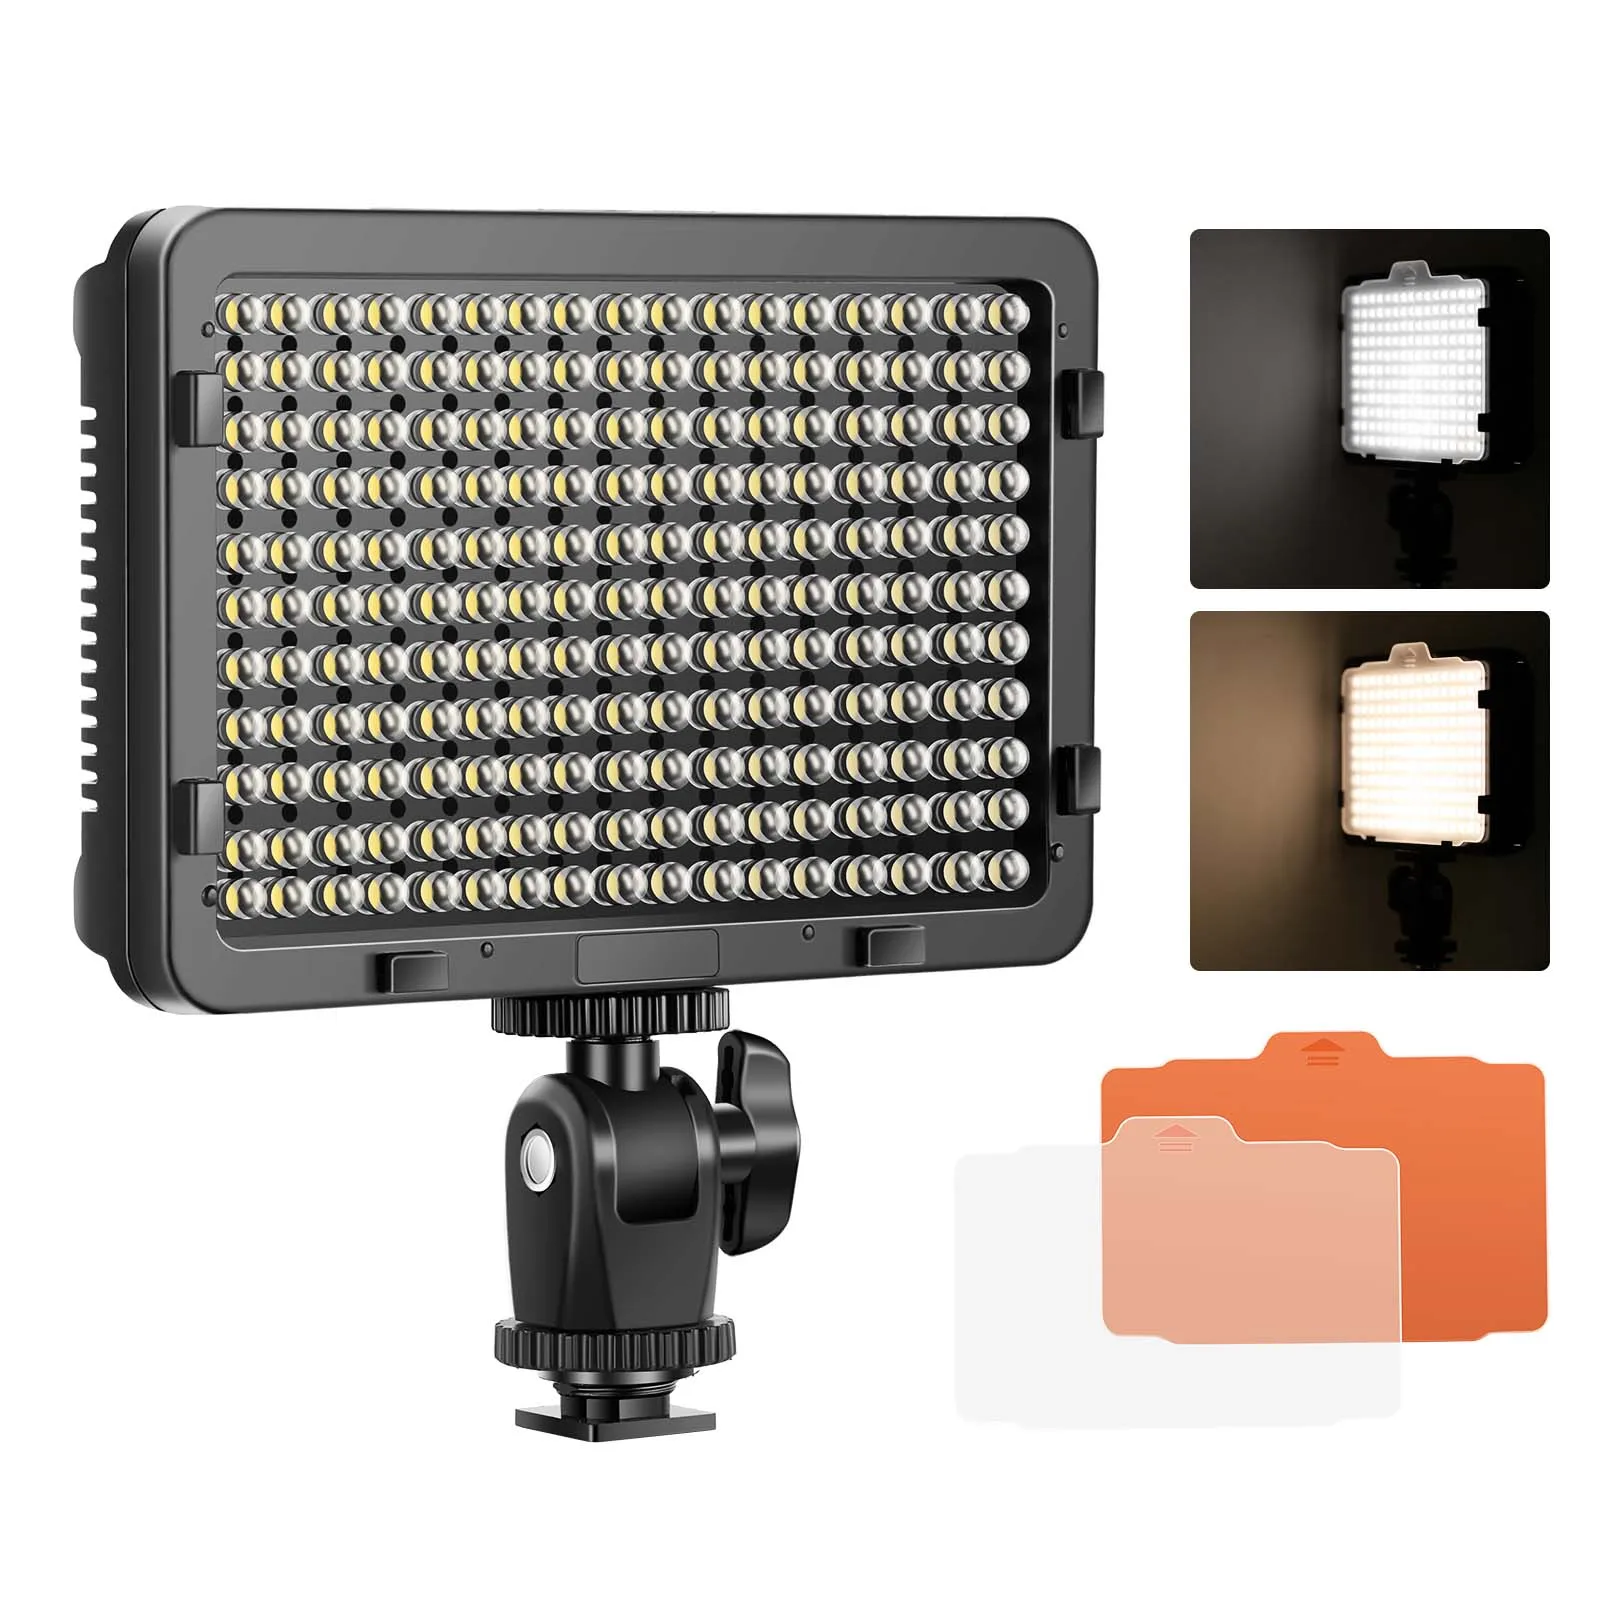 Panasonic LED Video Light Sony Samsung Pentax Olympus and All DSLR Cmeras Nikon ESDDI 176 LED Ultra Bright Dimmable Camera Panel Light with Battery and USB Cable for Canon 